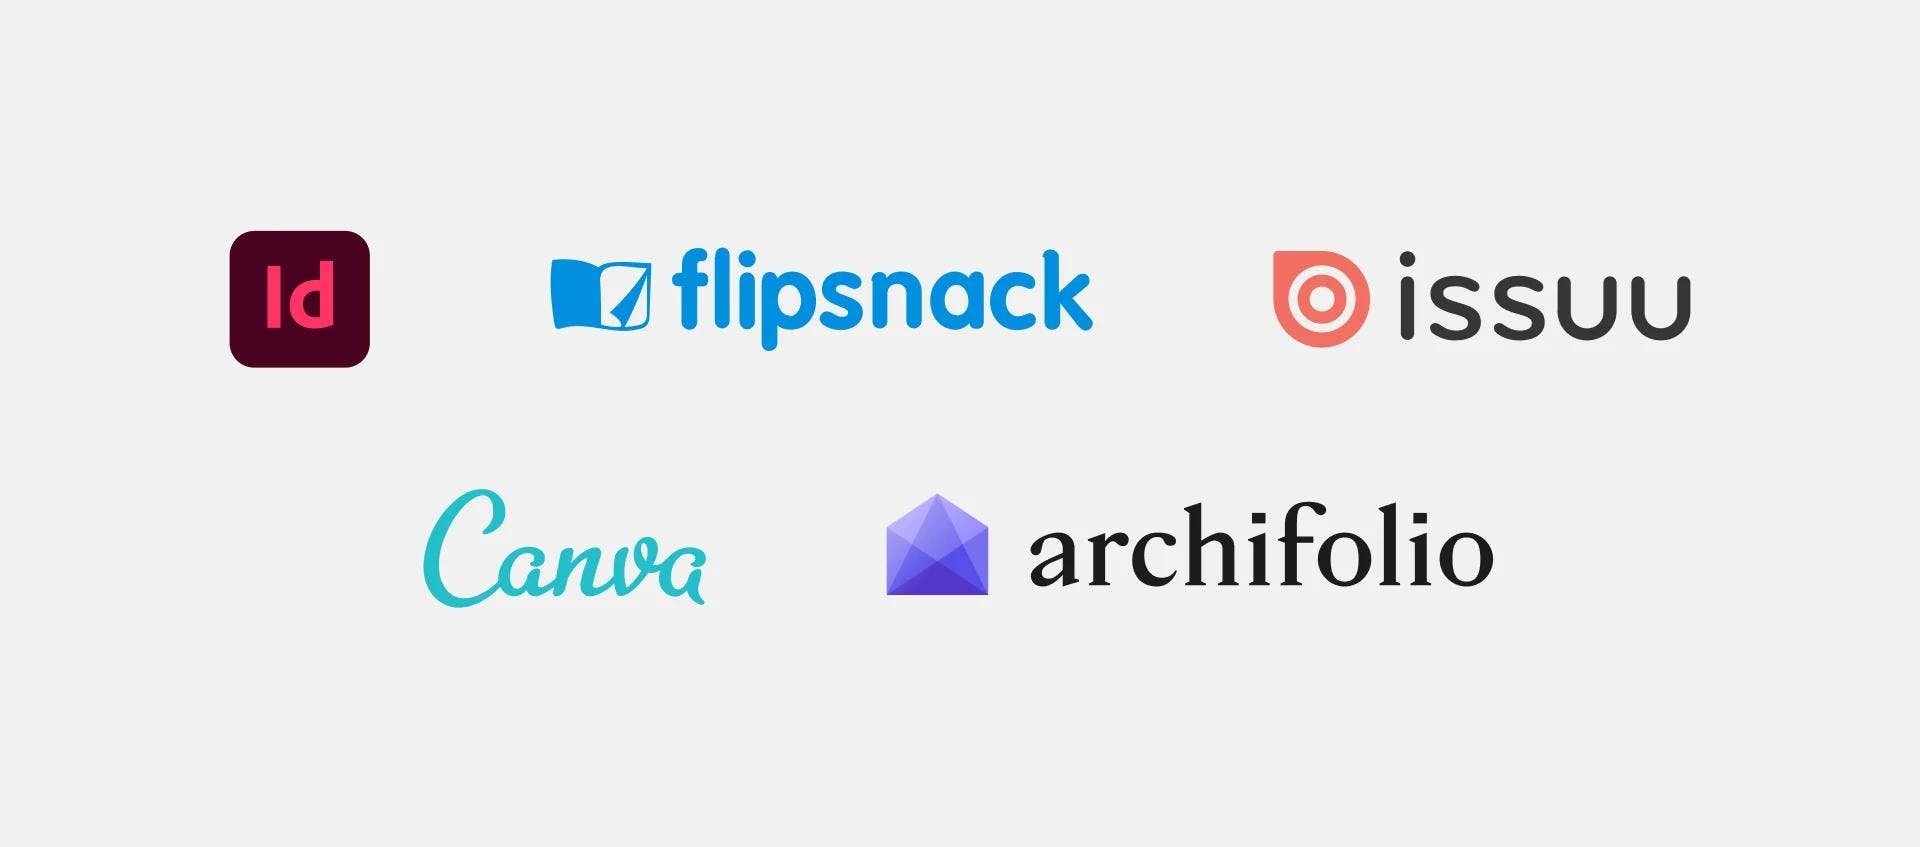 Logos of the best PDF builders and sharing platforms for interior designers and architects (Archifolio, InDesign, Flipsnack, Issuu, Canva)